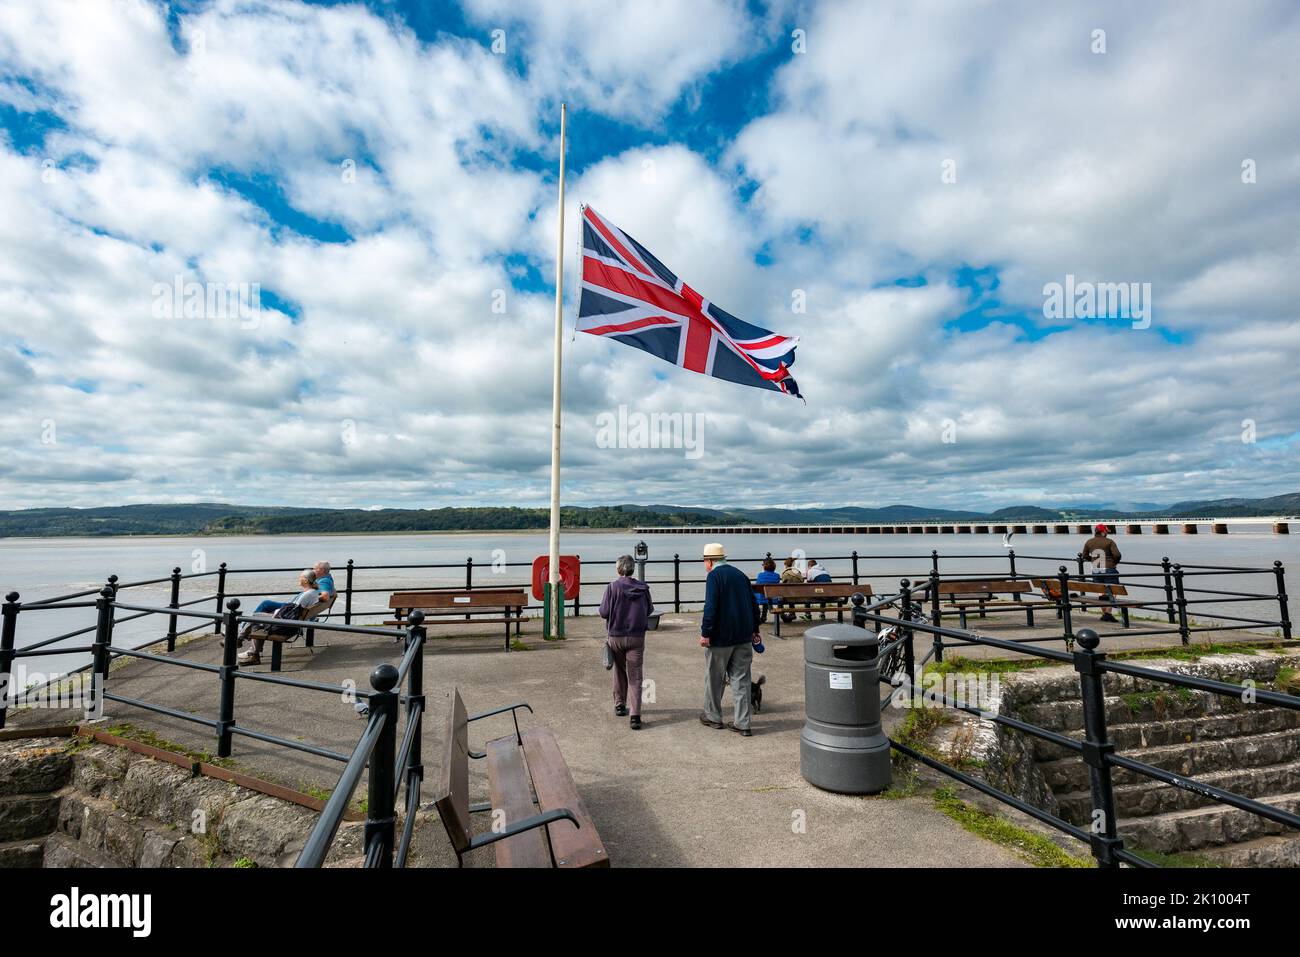 Mourning Queen Elizabeth II, Arnside, Milnthorpe, Cumbria, UK The Union Flag at half-mast on the pier at Arnside, Milnthorpe, Cumbria, UK Credit: John Eveson/Alamy Live News Stock Photo